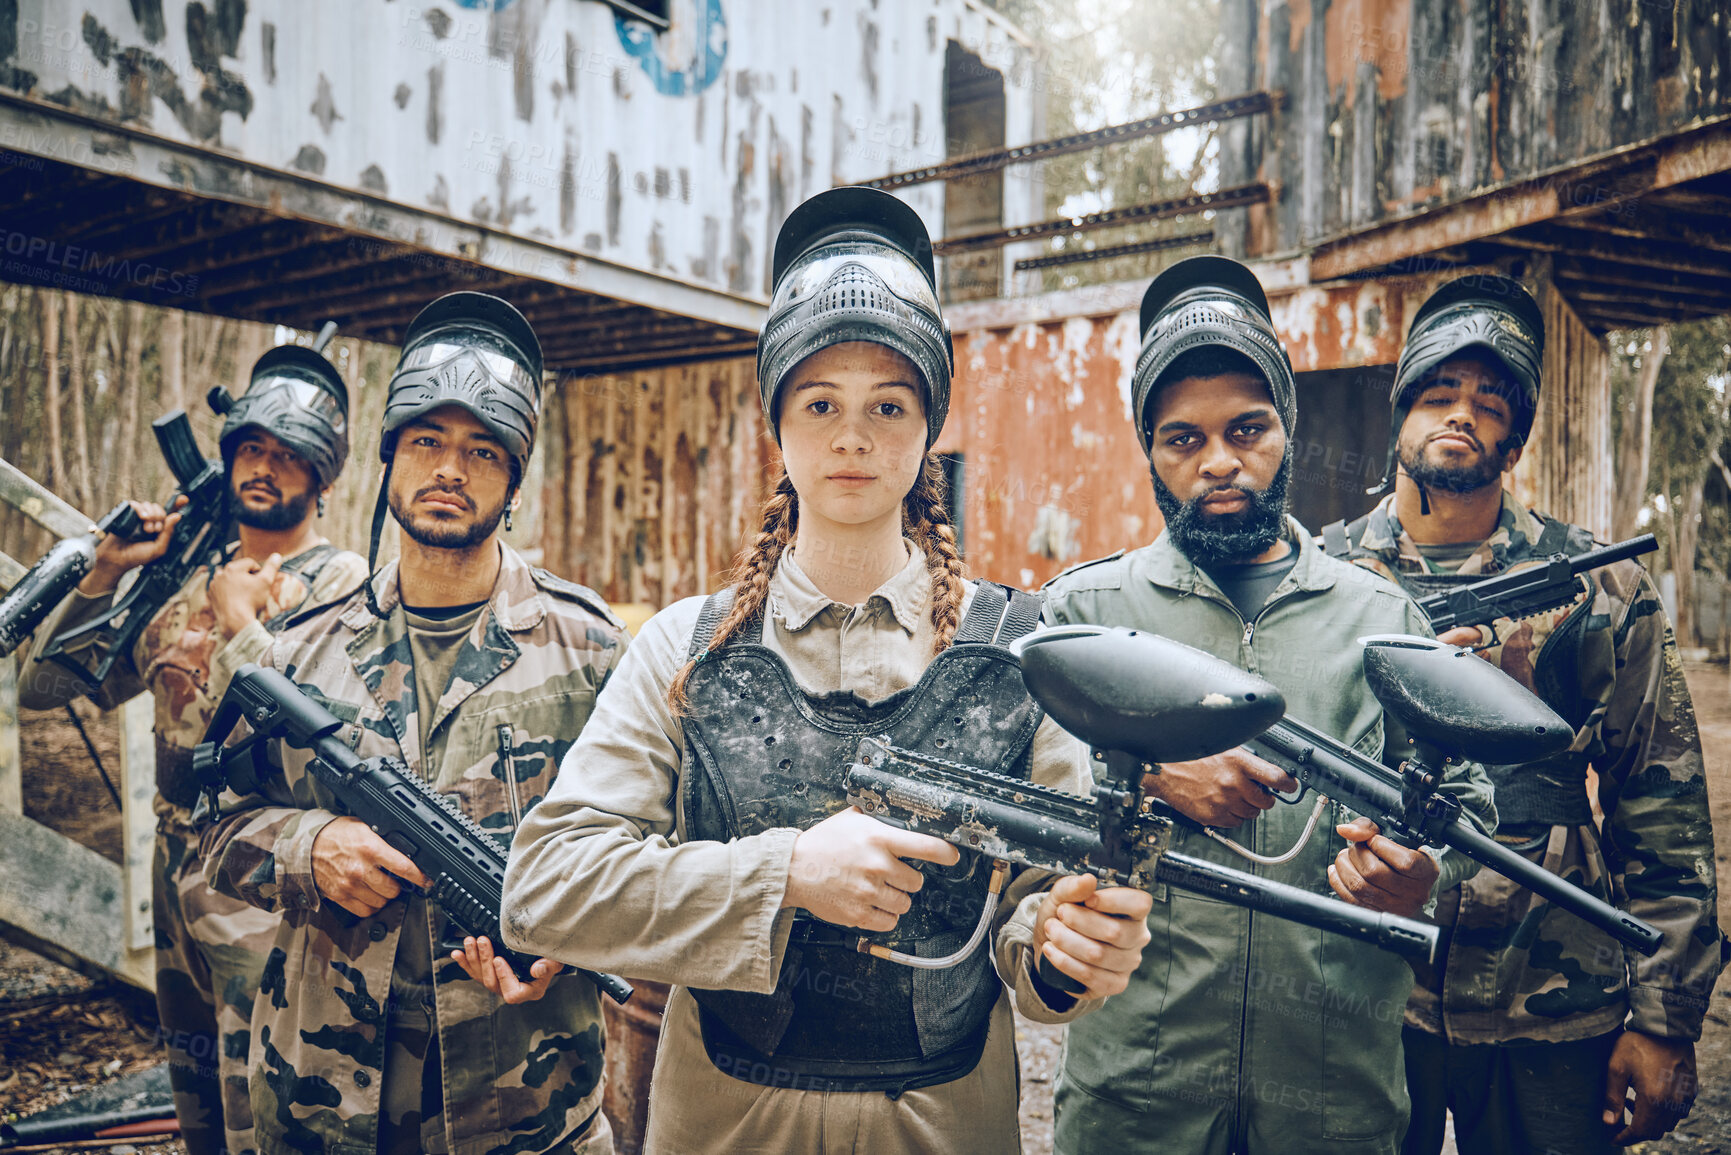 Buy stock photo Paintball, team portrait and woman leader with gun for sports game, competition or action challenge. Diversity men and female group for military, soldier or army mission in outdoor war battlefield